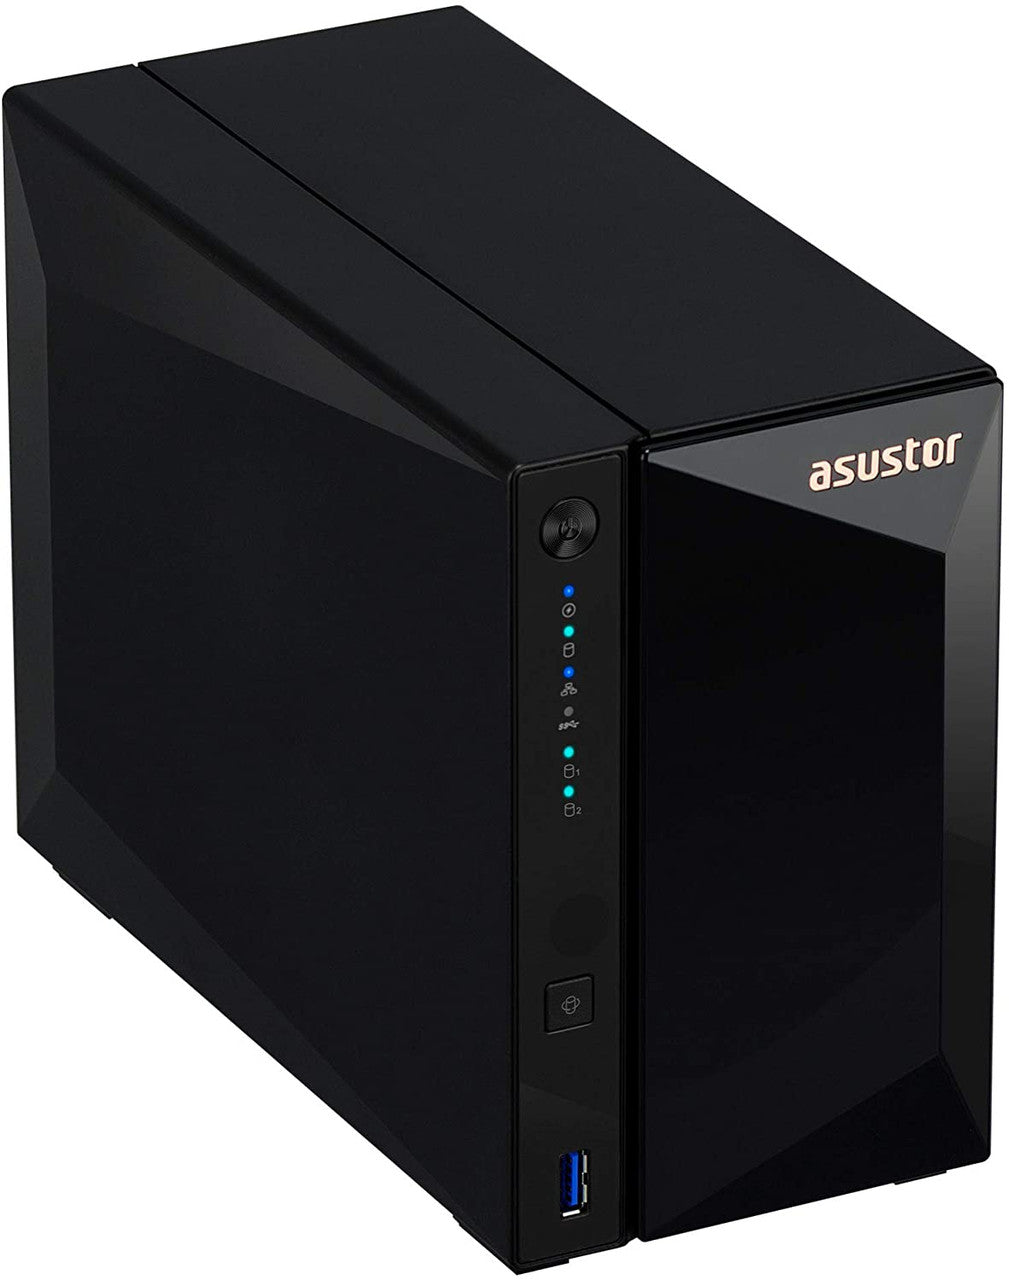 Asustor AS3302T 2-Bay Drivestor 2 PRO NAS with 2GB RAM and 16TB (2x8TB) Western Digital RED PRO Drives Fully Assembled and Tested